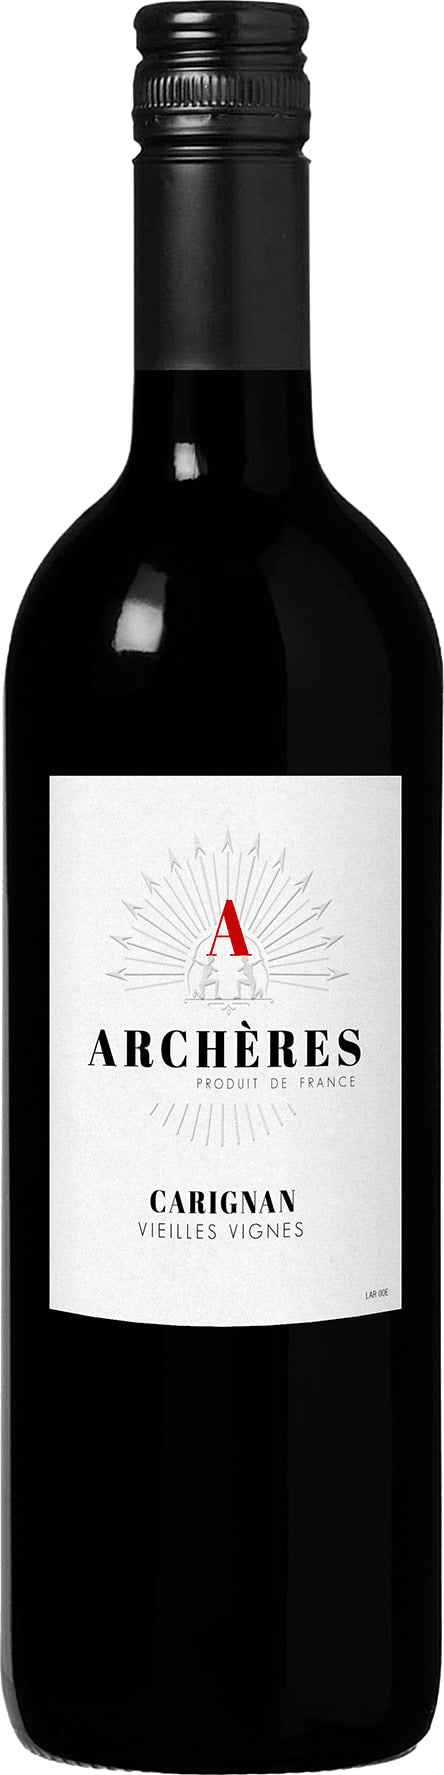 Les Archeres Carignan, Pays de l'Herault 2022 75cl - Buy Les Archeres Wines from GREAT WINES DIRECT wine shop